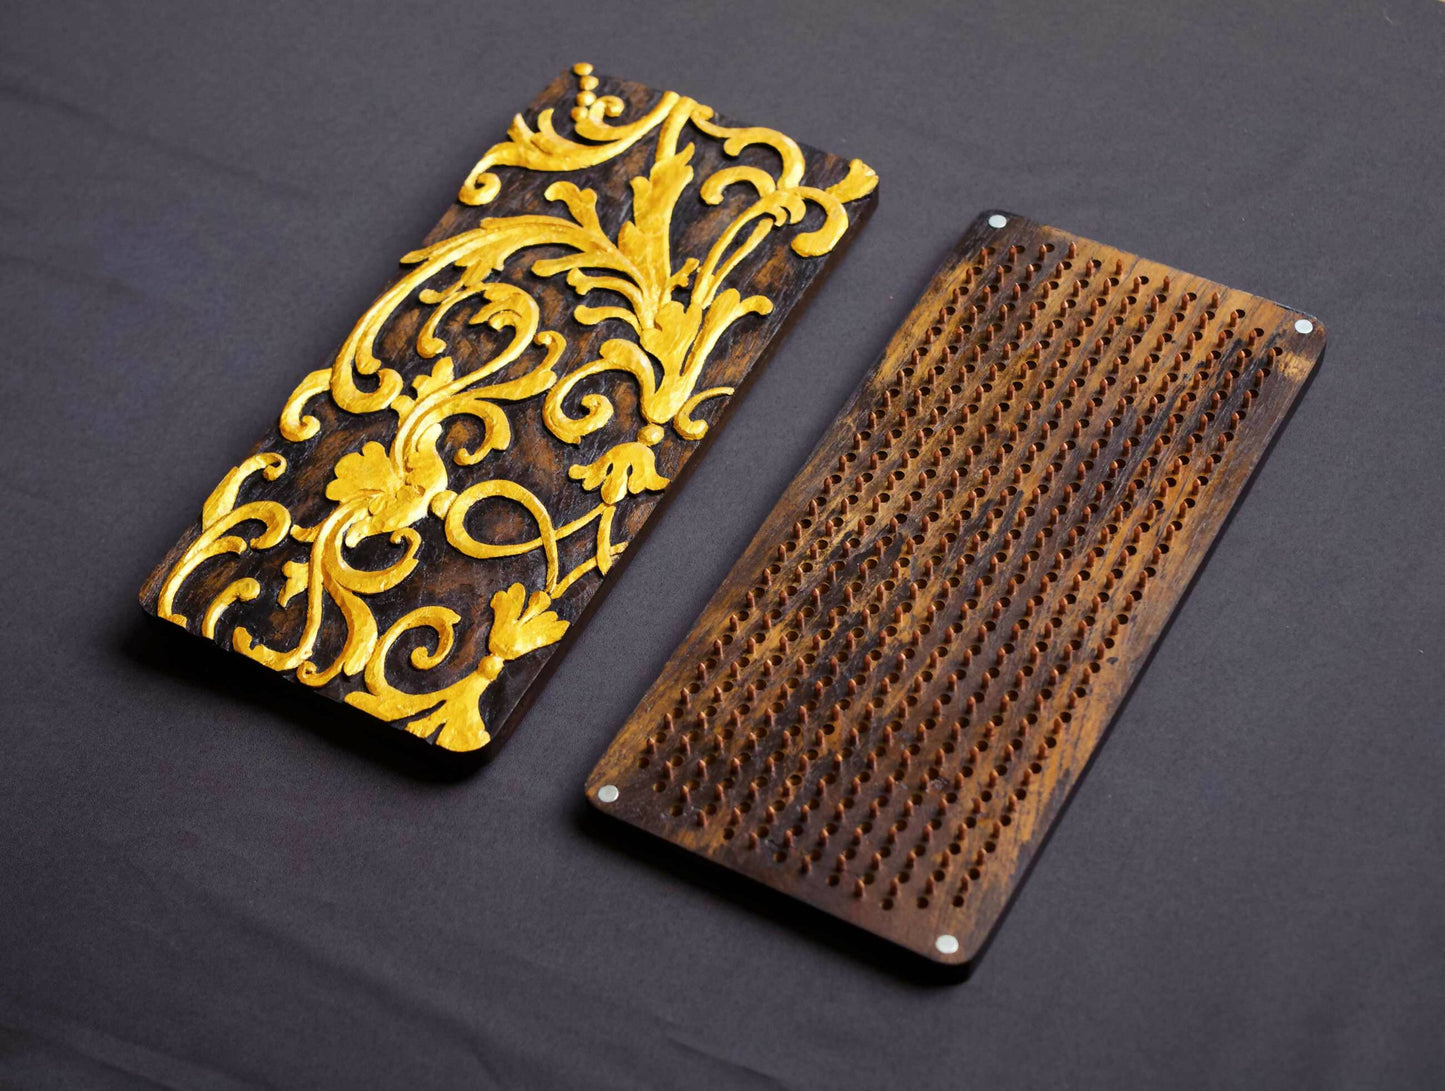 Sadhu board with hand carved openwork pattern, premium quality.